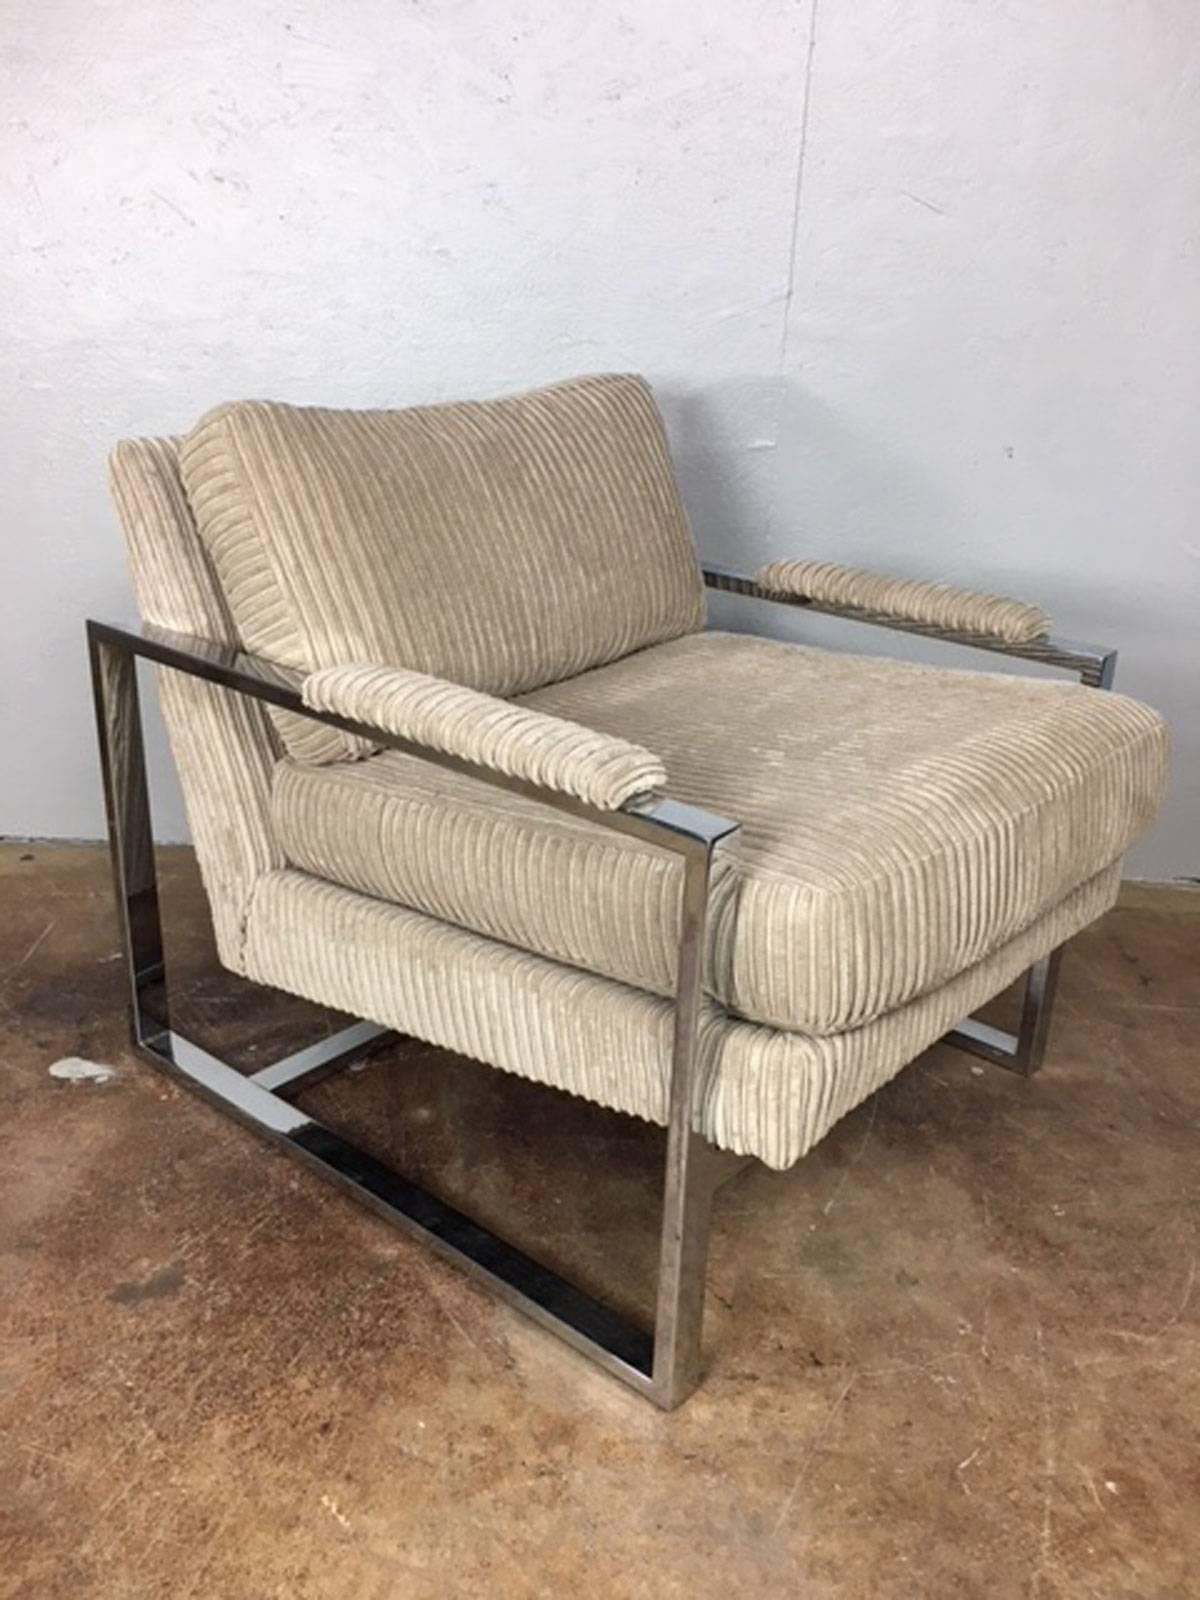 Pair of Milo Baughman chrome structured lounge chairs in a comfortable gray tone upholstery. Seat height is 19 inches.